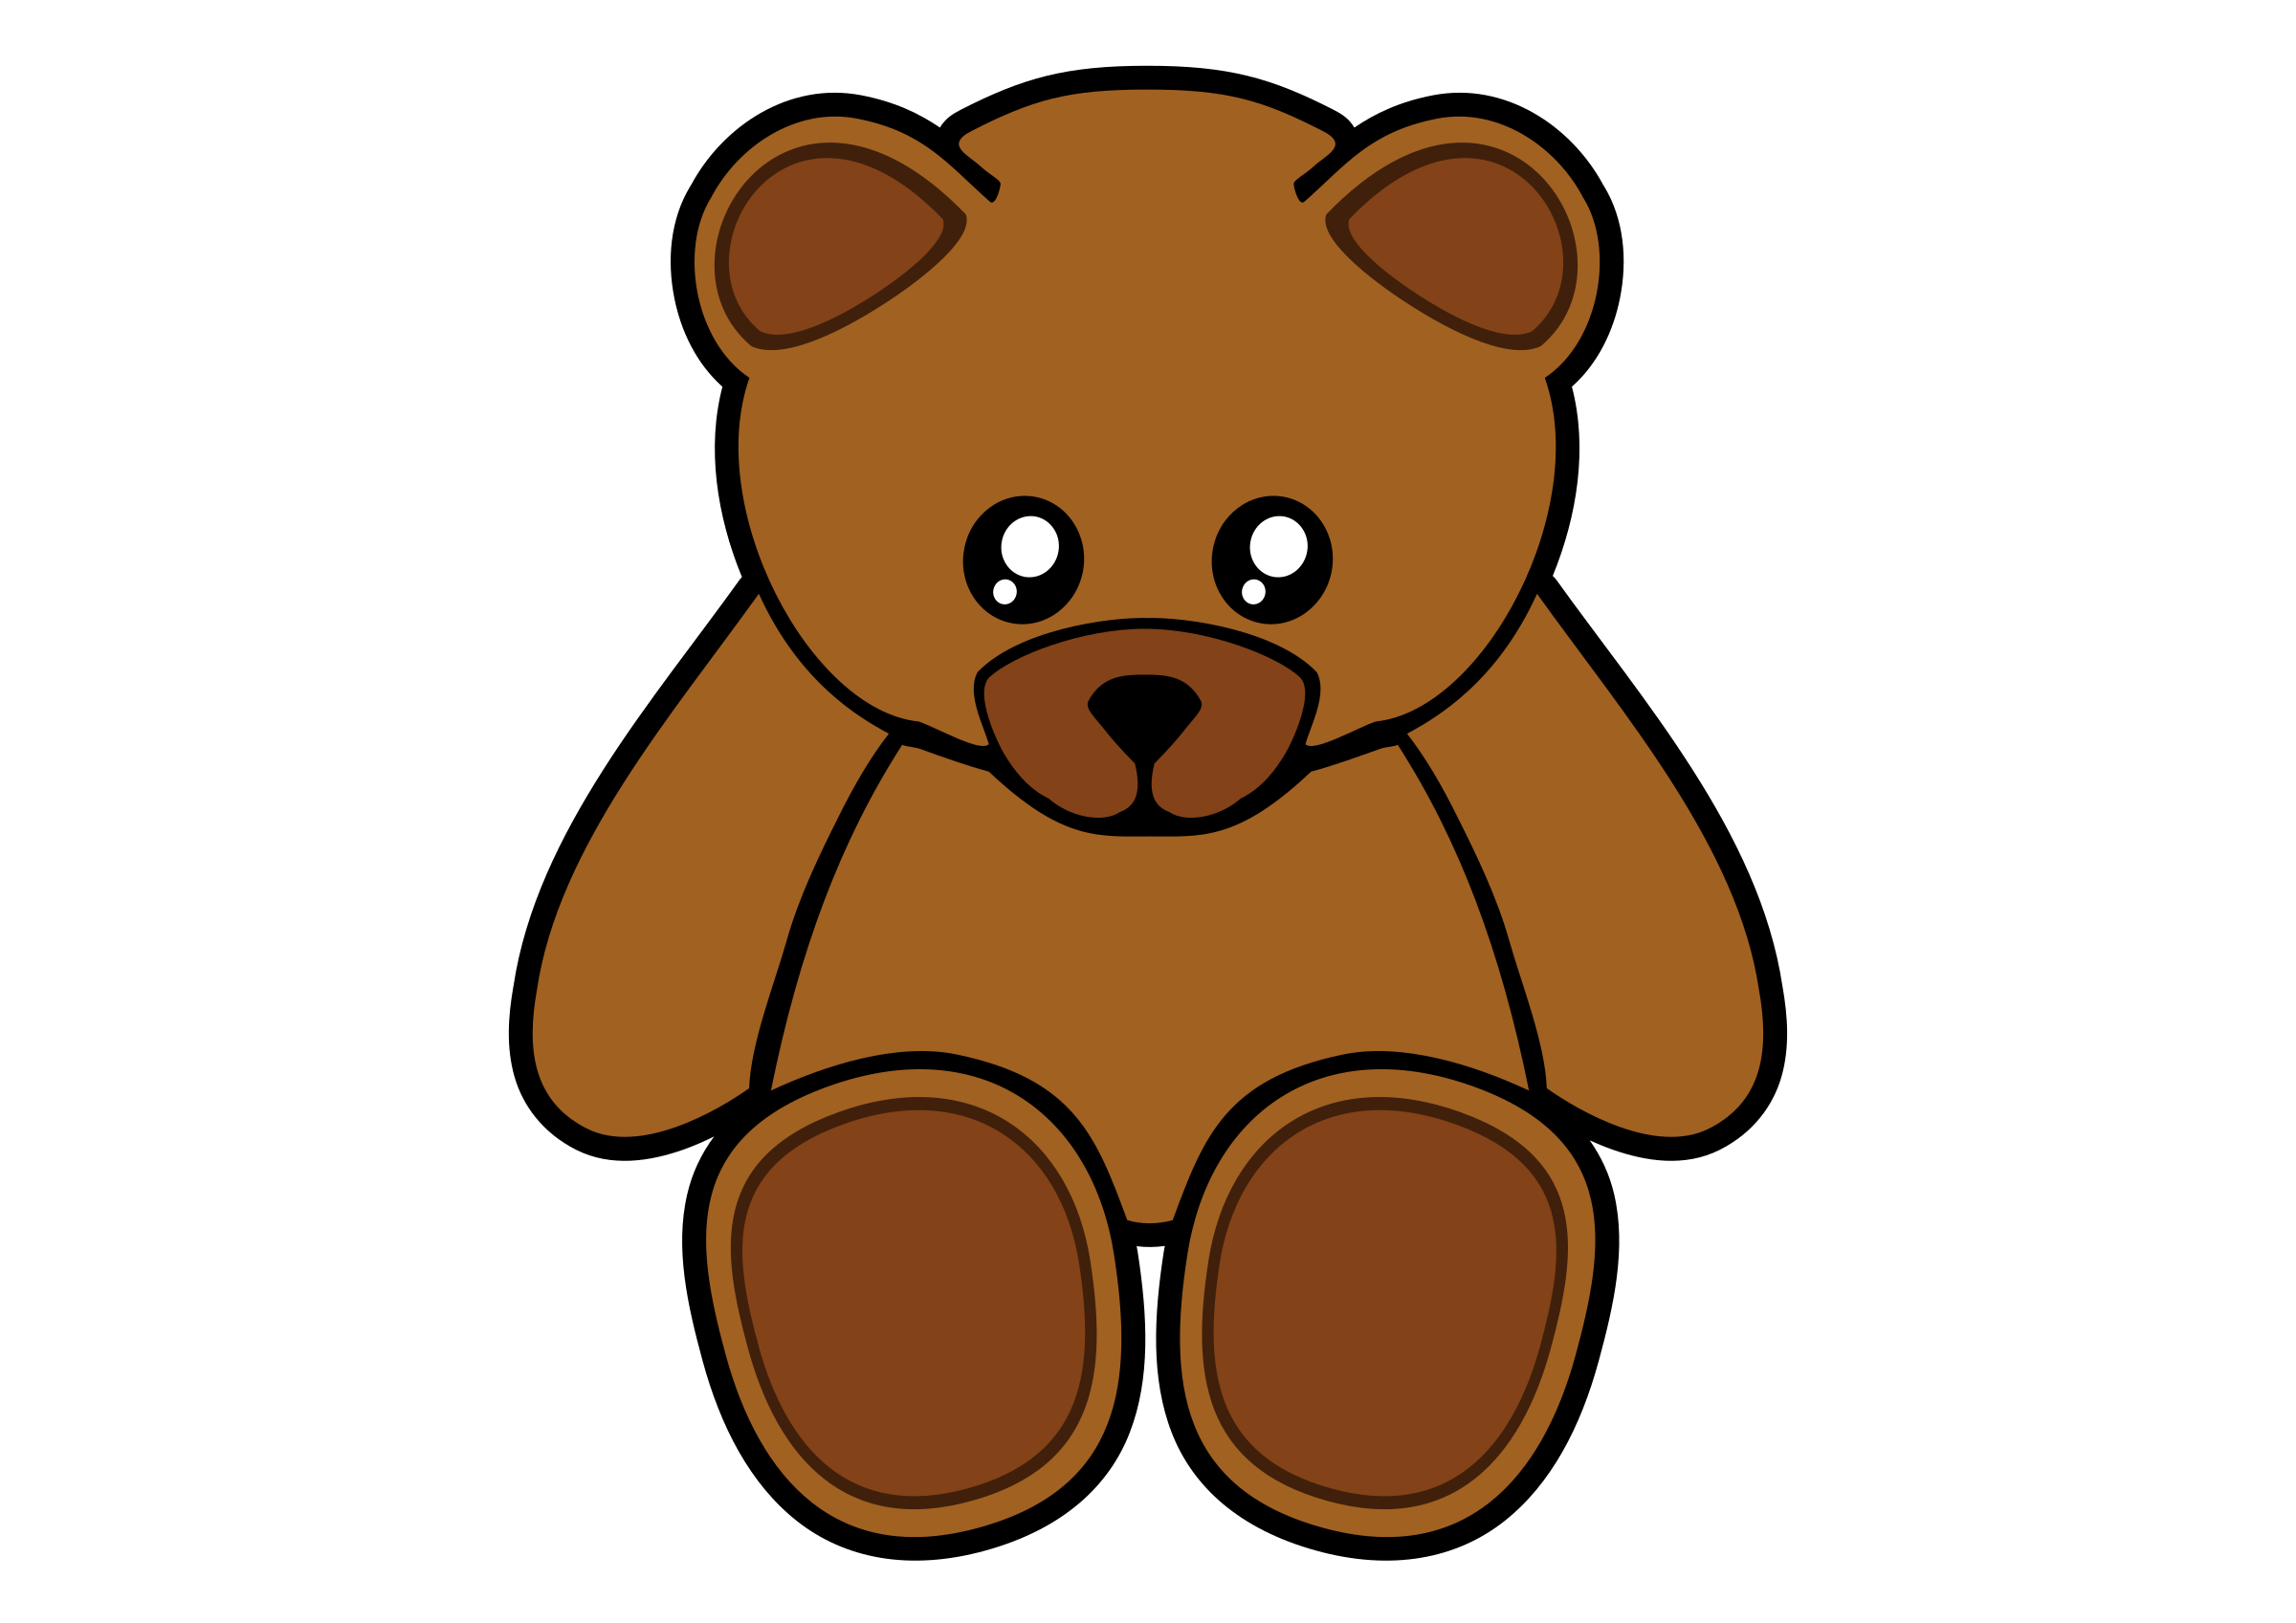 free clipart images teddy bear - photo #30